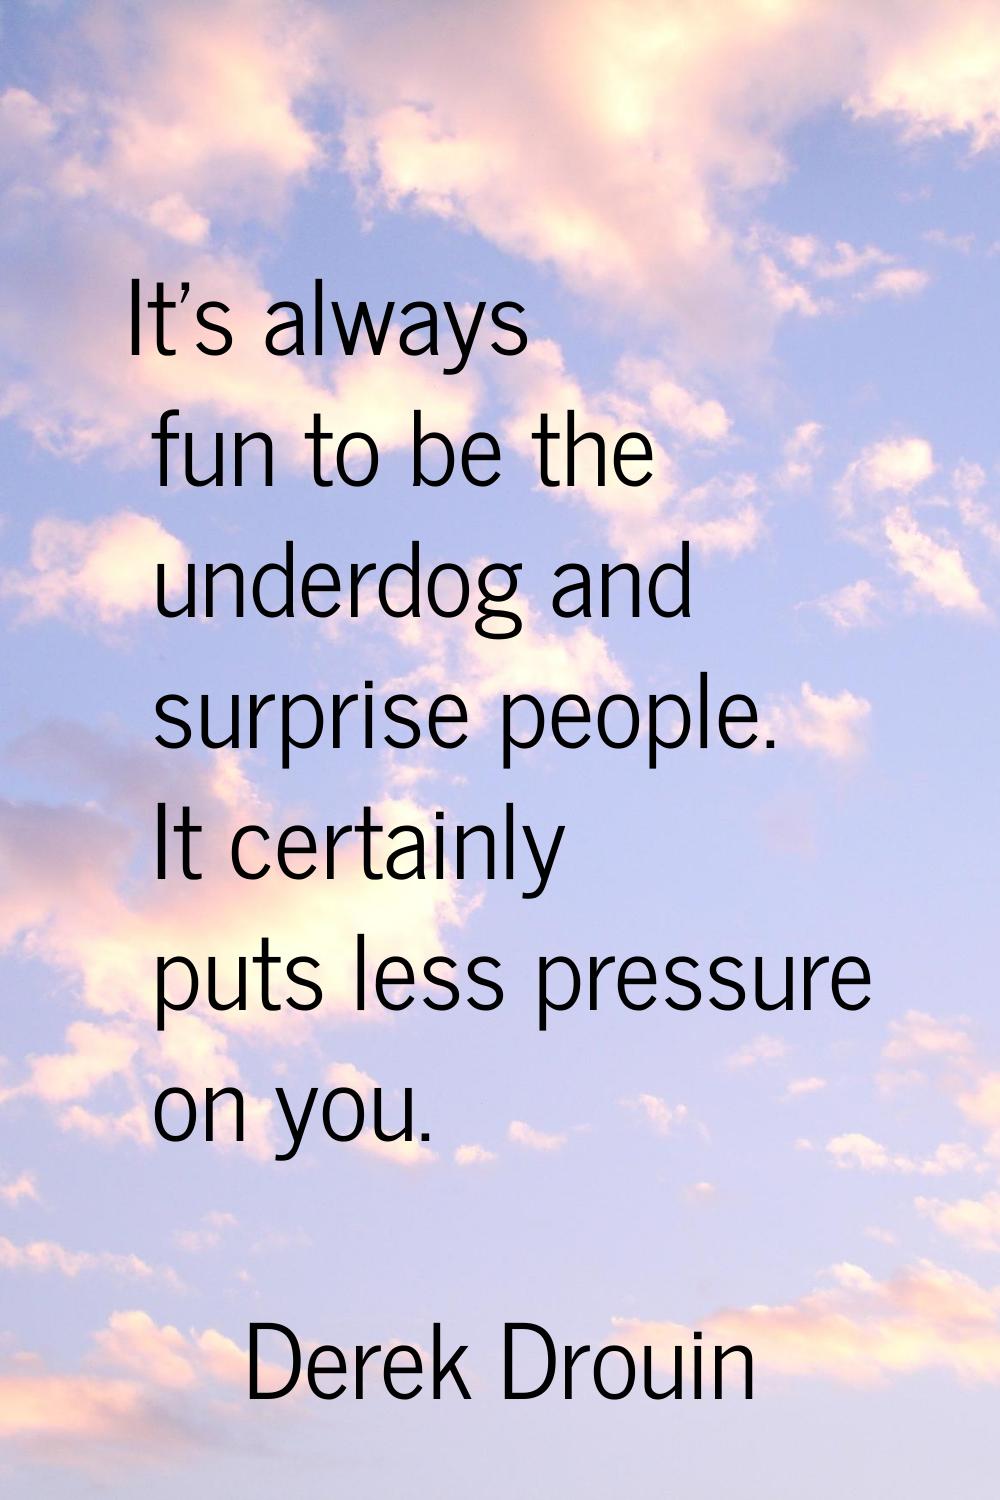 It's always fun to be the underdog and surprise people. It certainly puts less pressure on you.